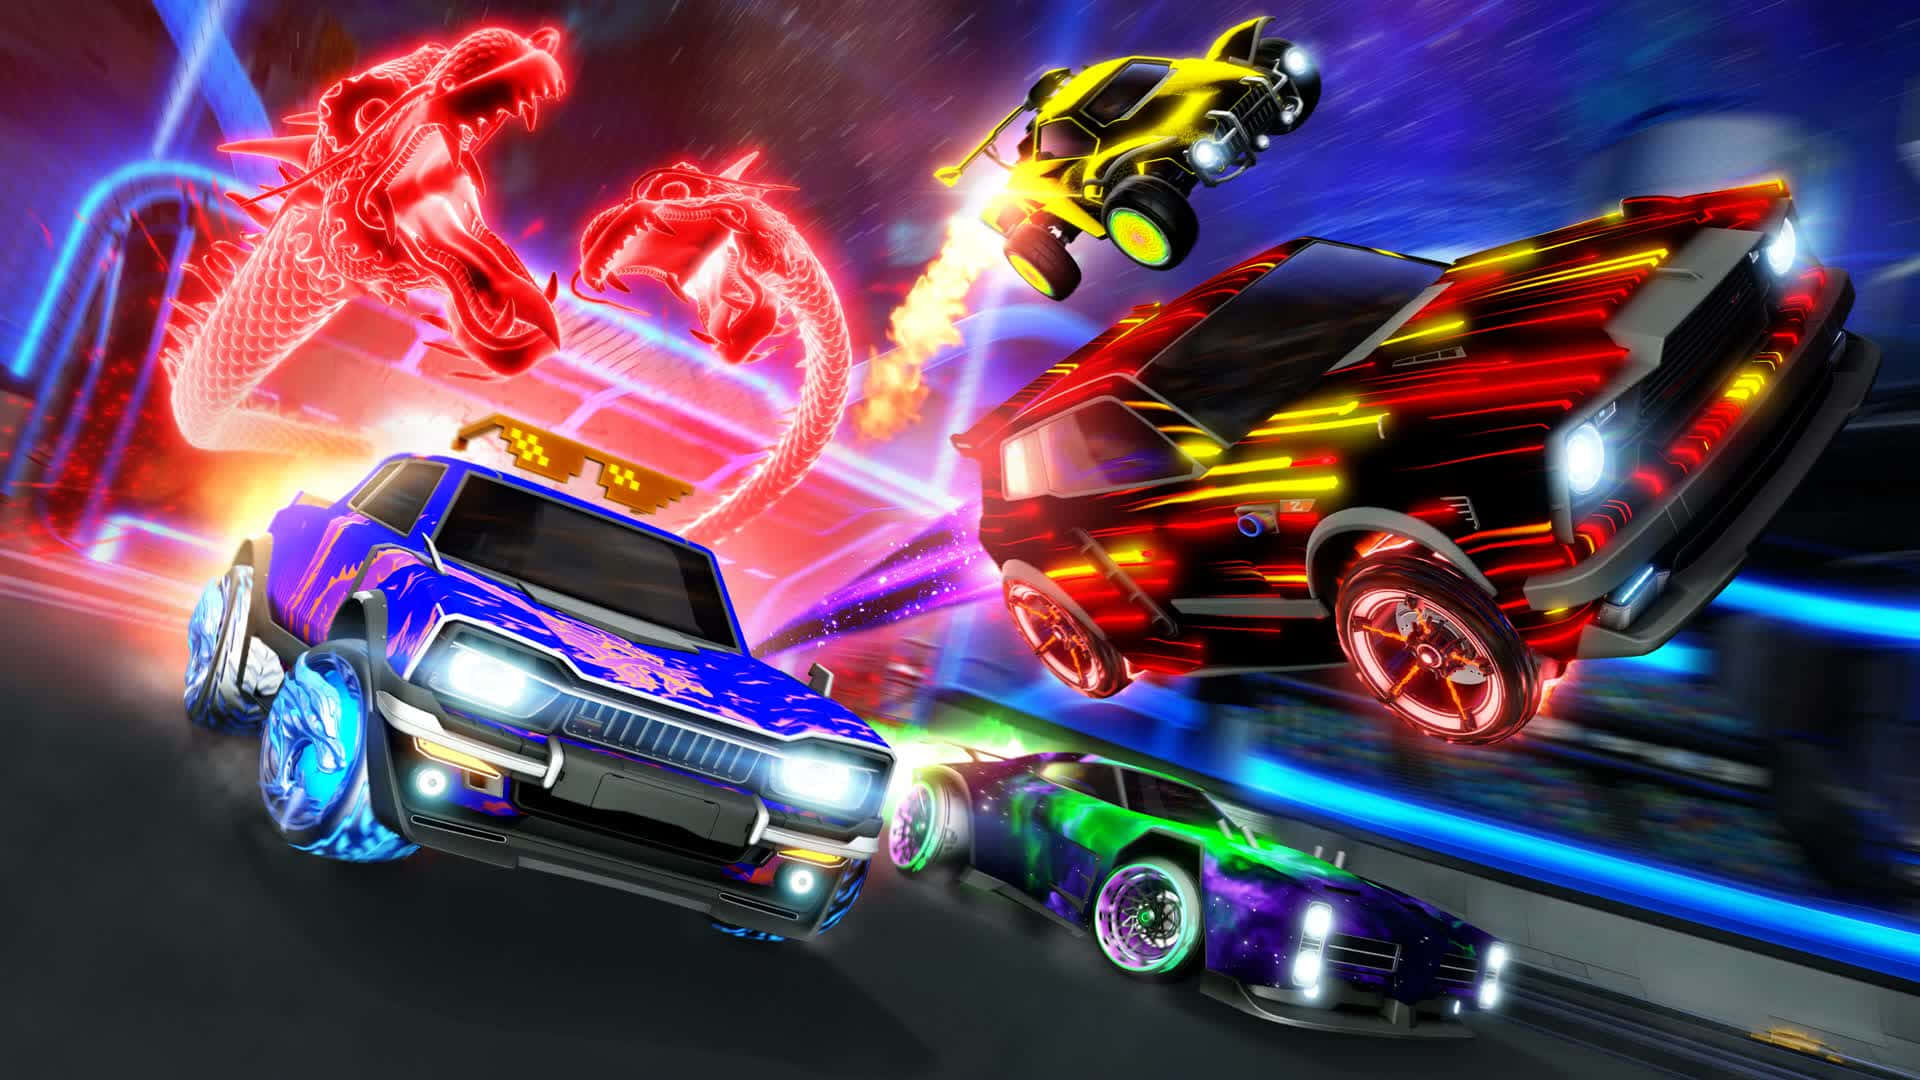 Take Your Driving Skills to New Heights With Rocket League